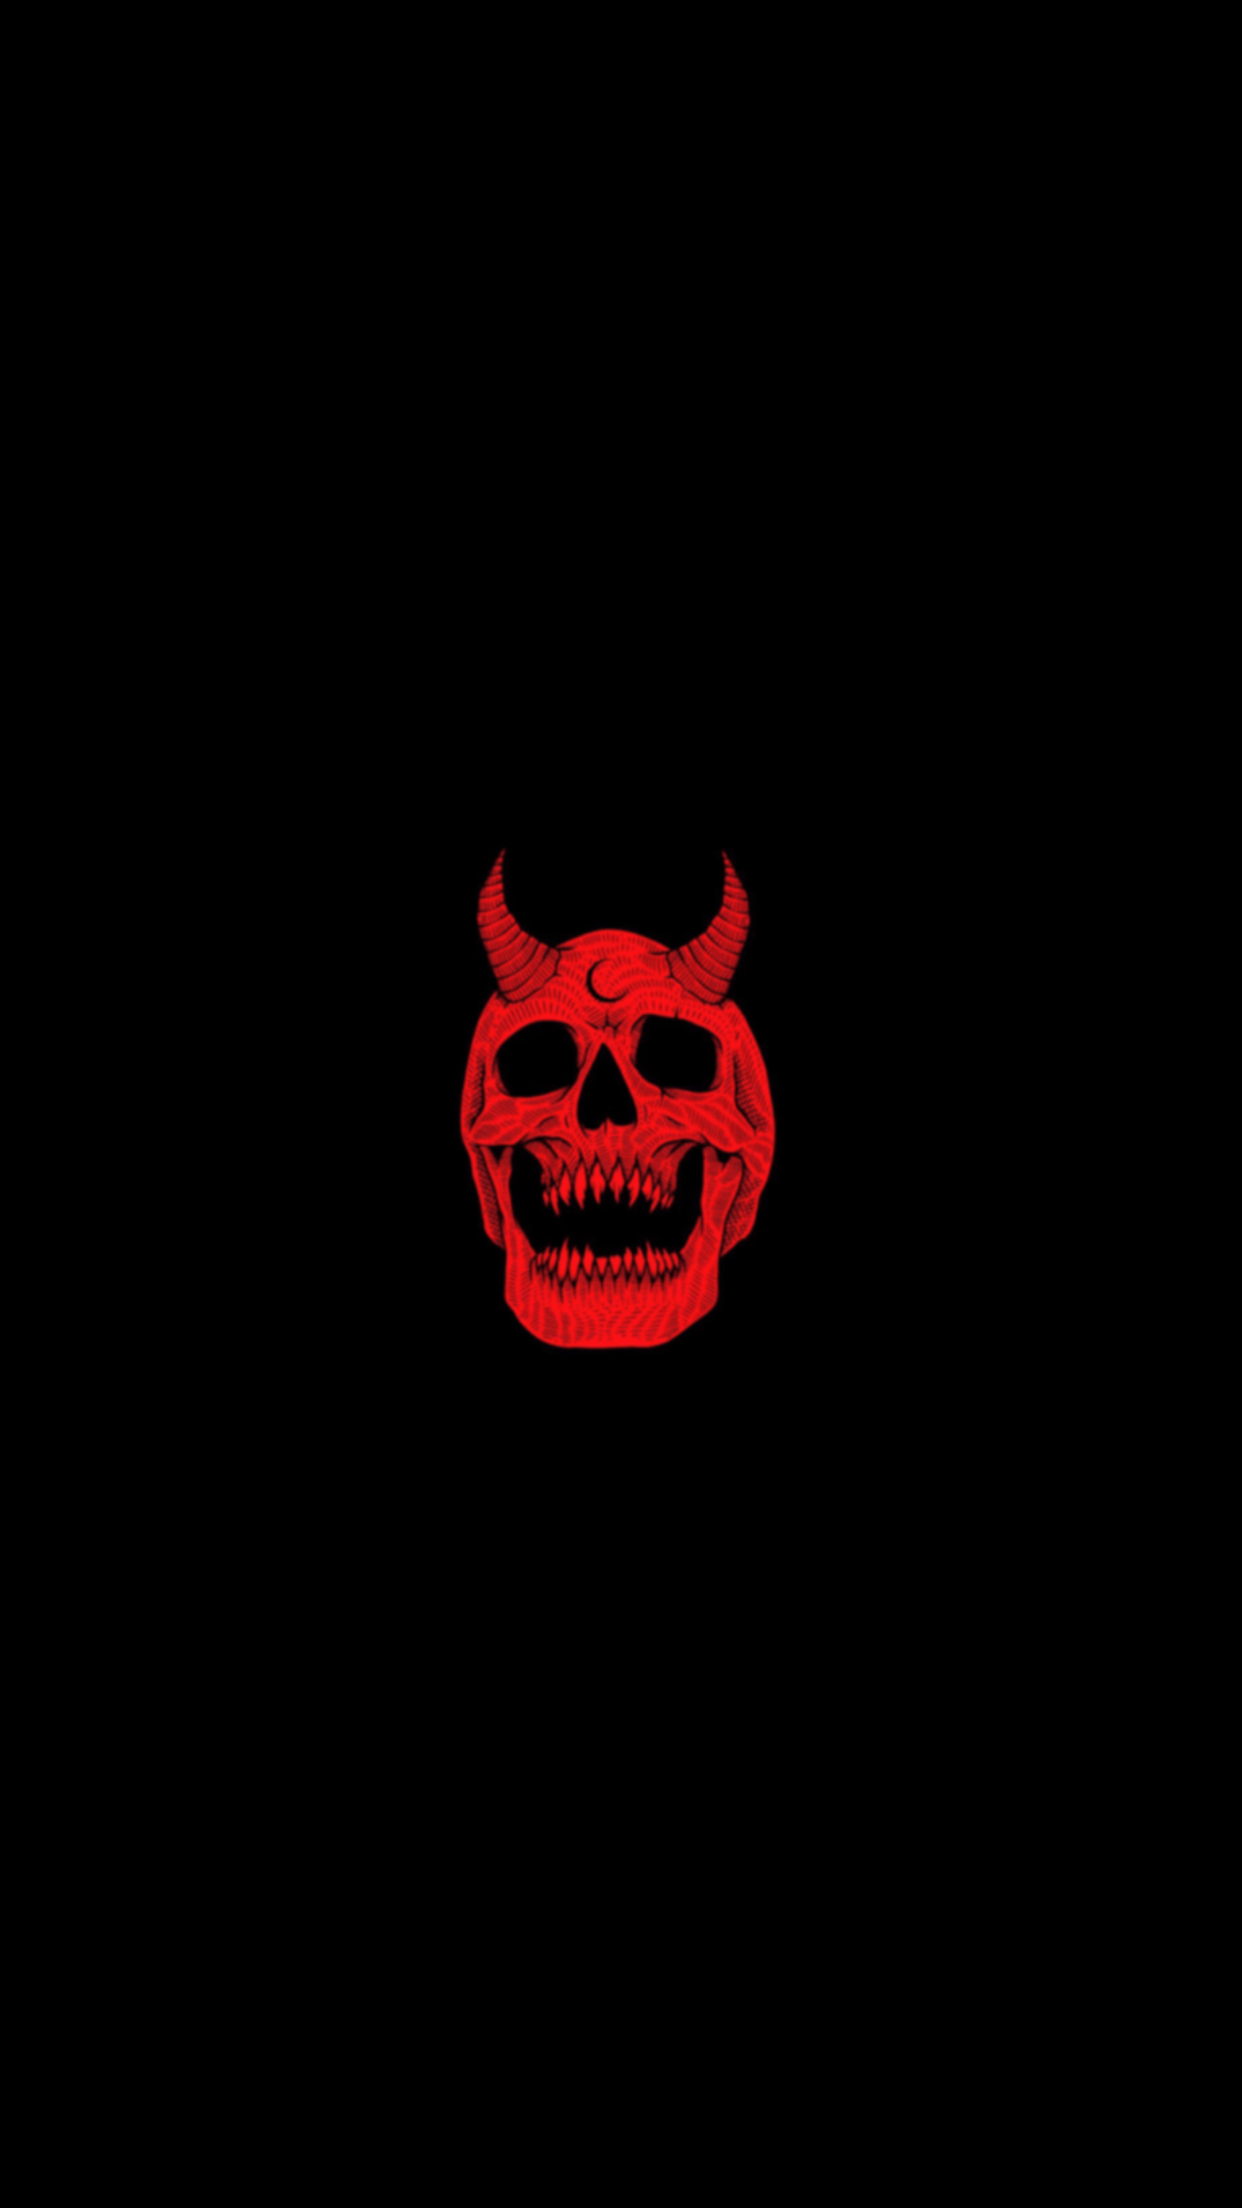 Red skull with horns on a black background - Skull